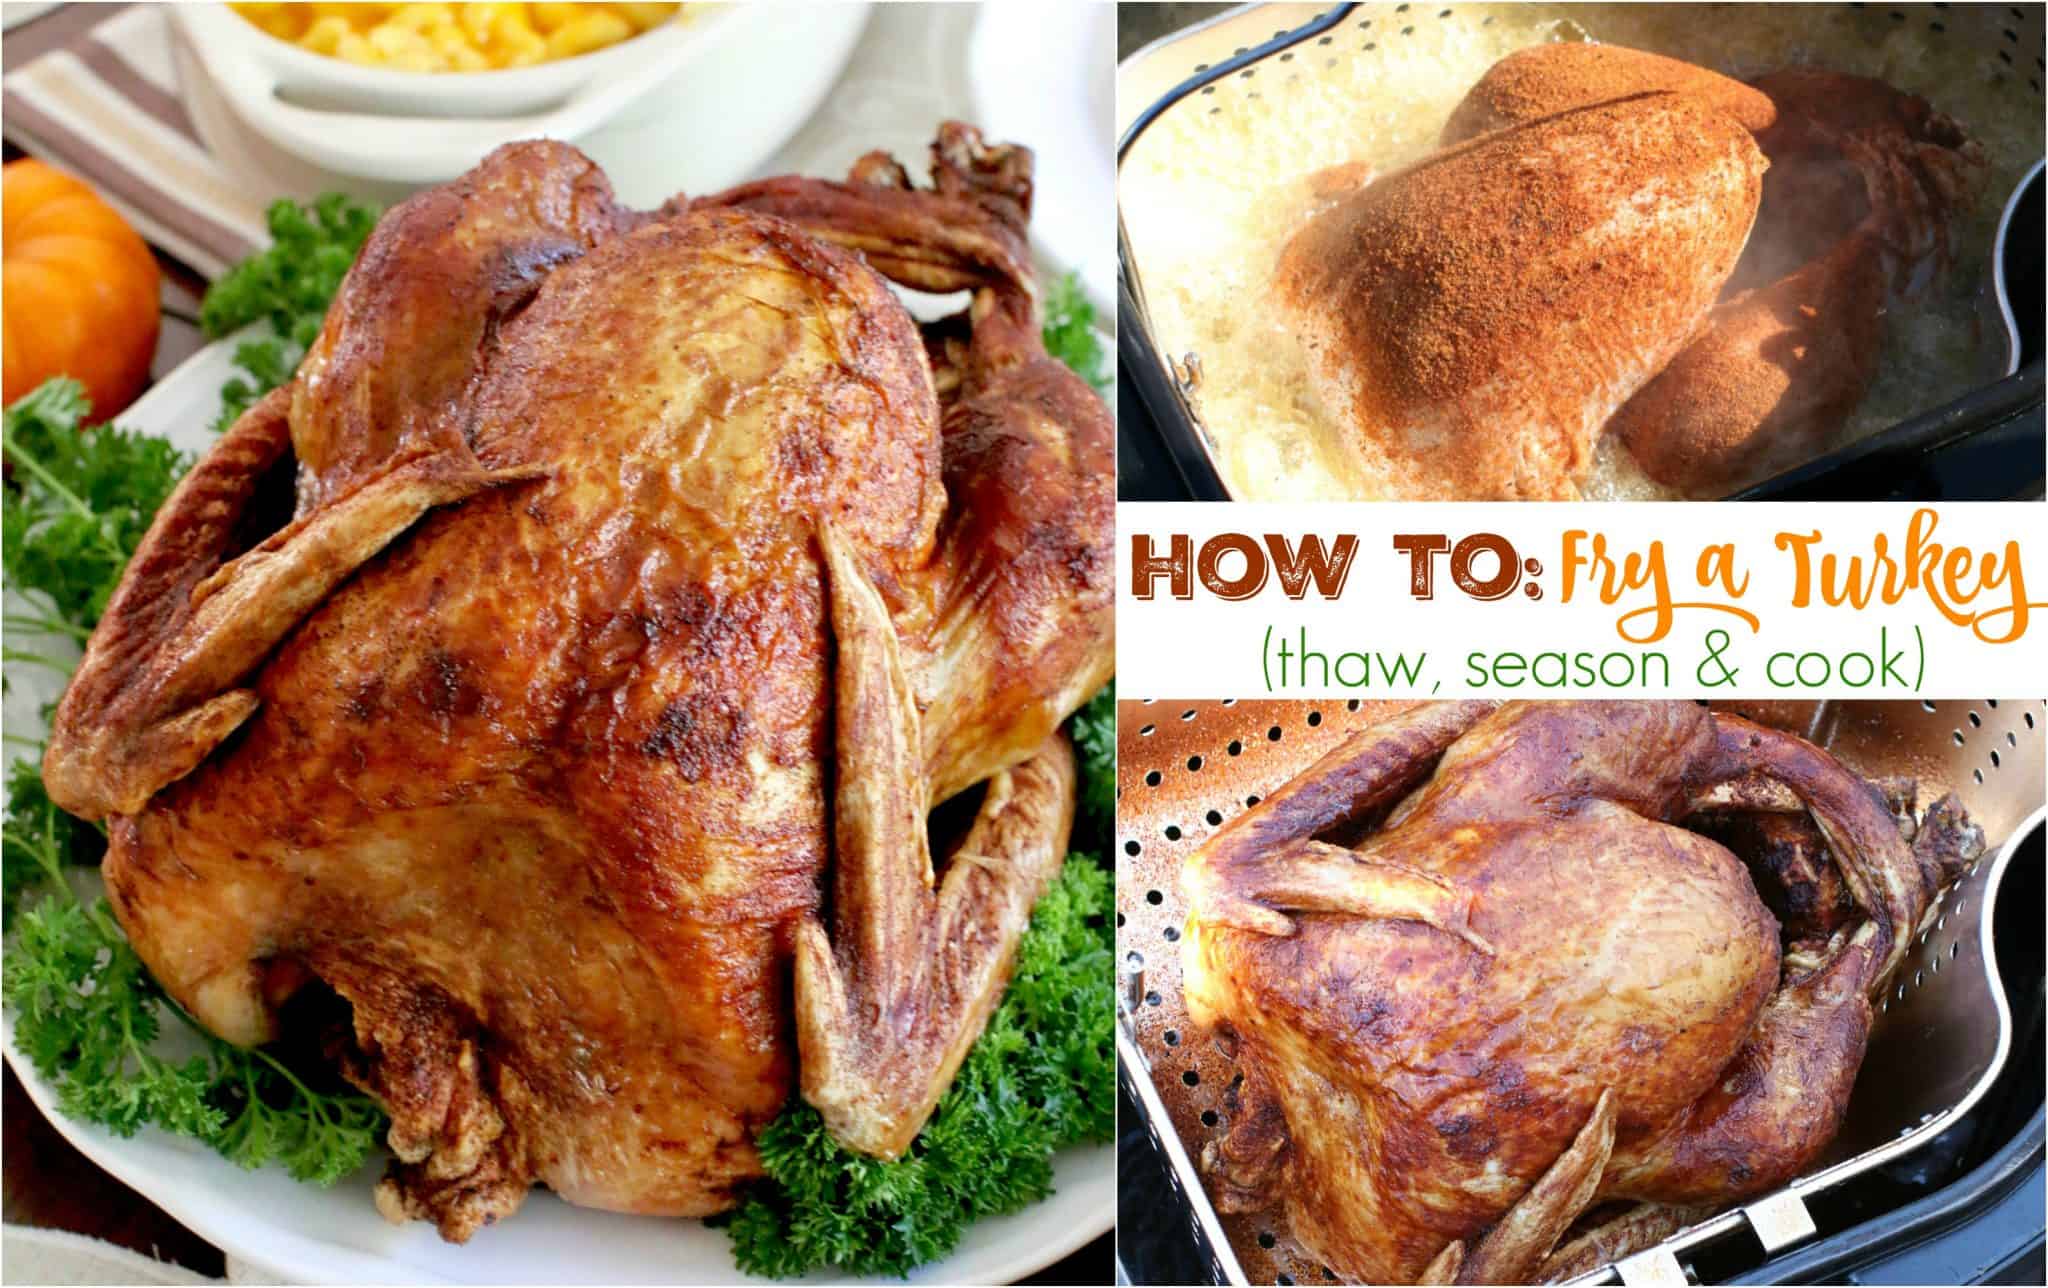 How to: Fry a Turkey for Thanksgiving or Christmas (full instructions, including seasoning recipe) at The Country Cook. Collage image showing three steps of the cooking process.